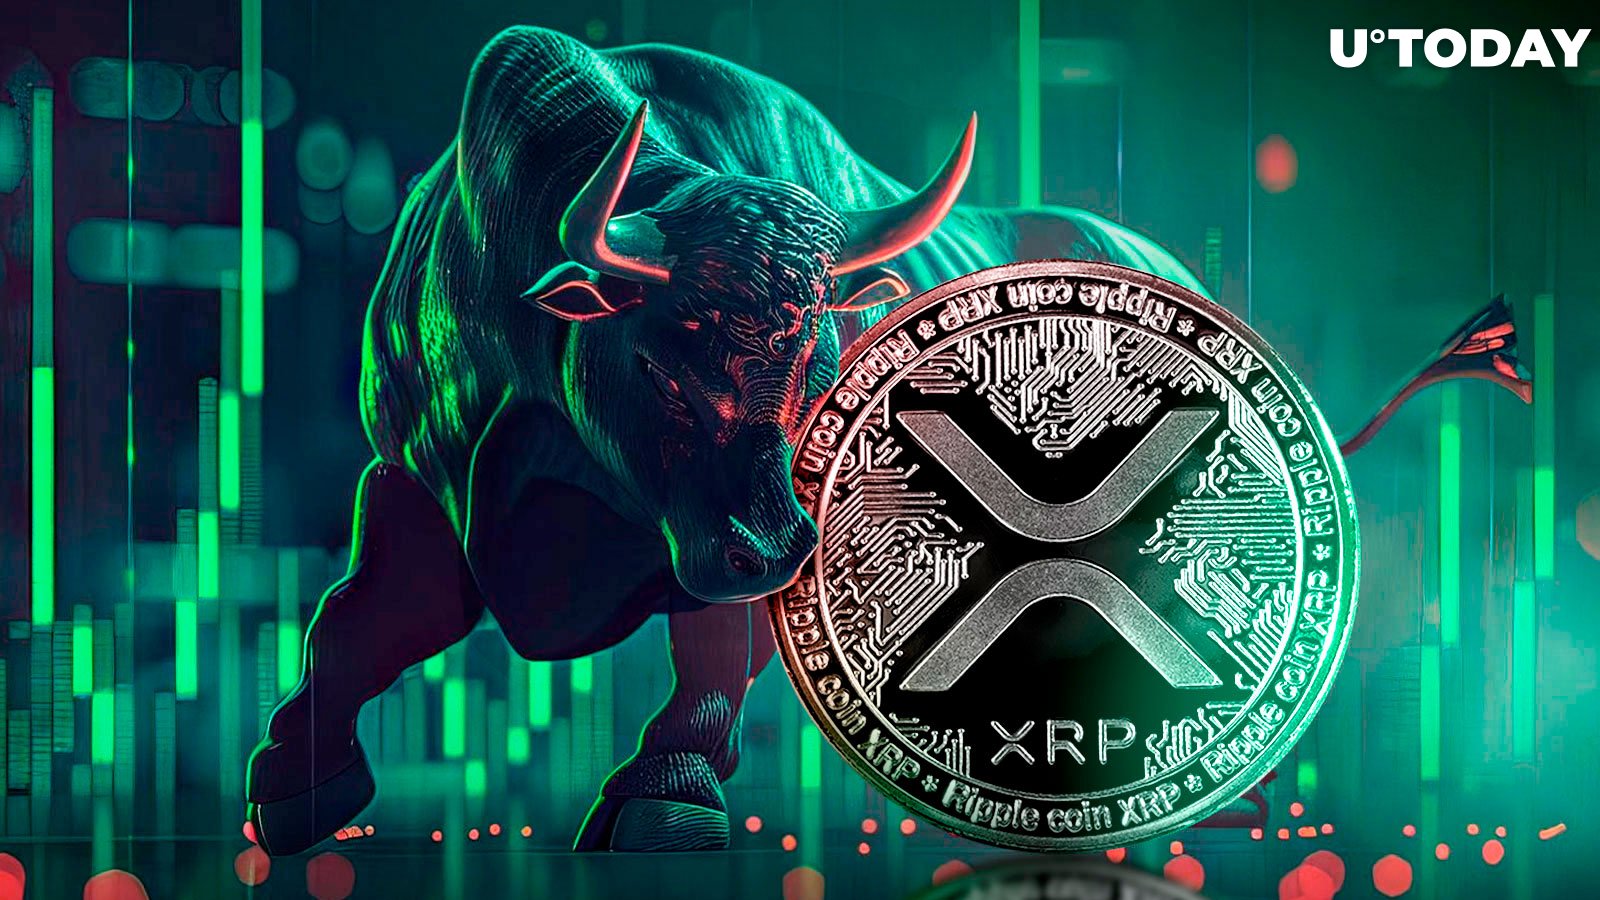 XRP Sees Strongest Bullish Sentiment in More Than a Year